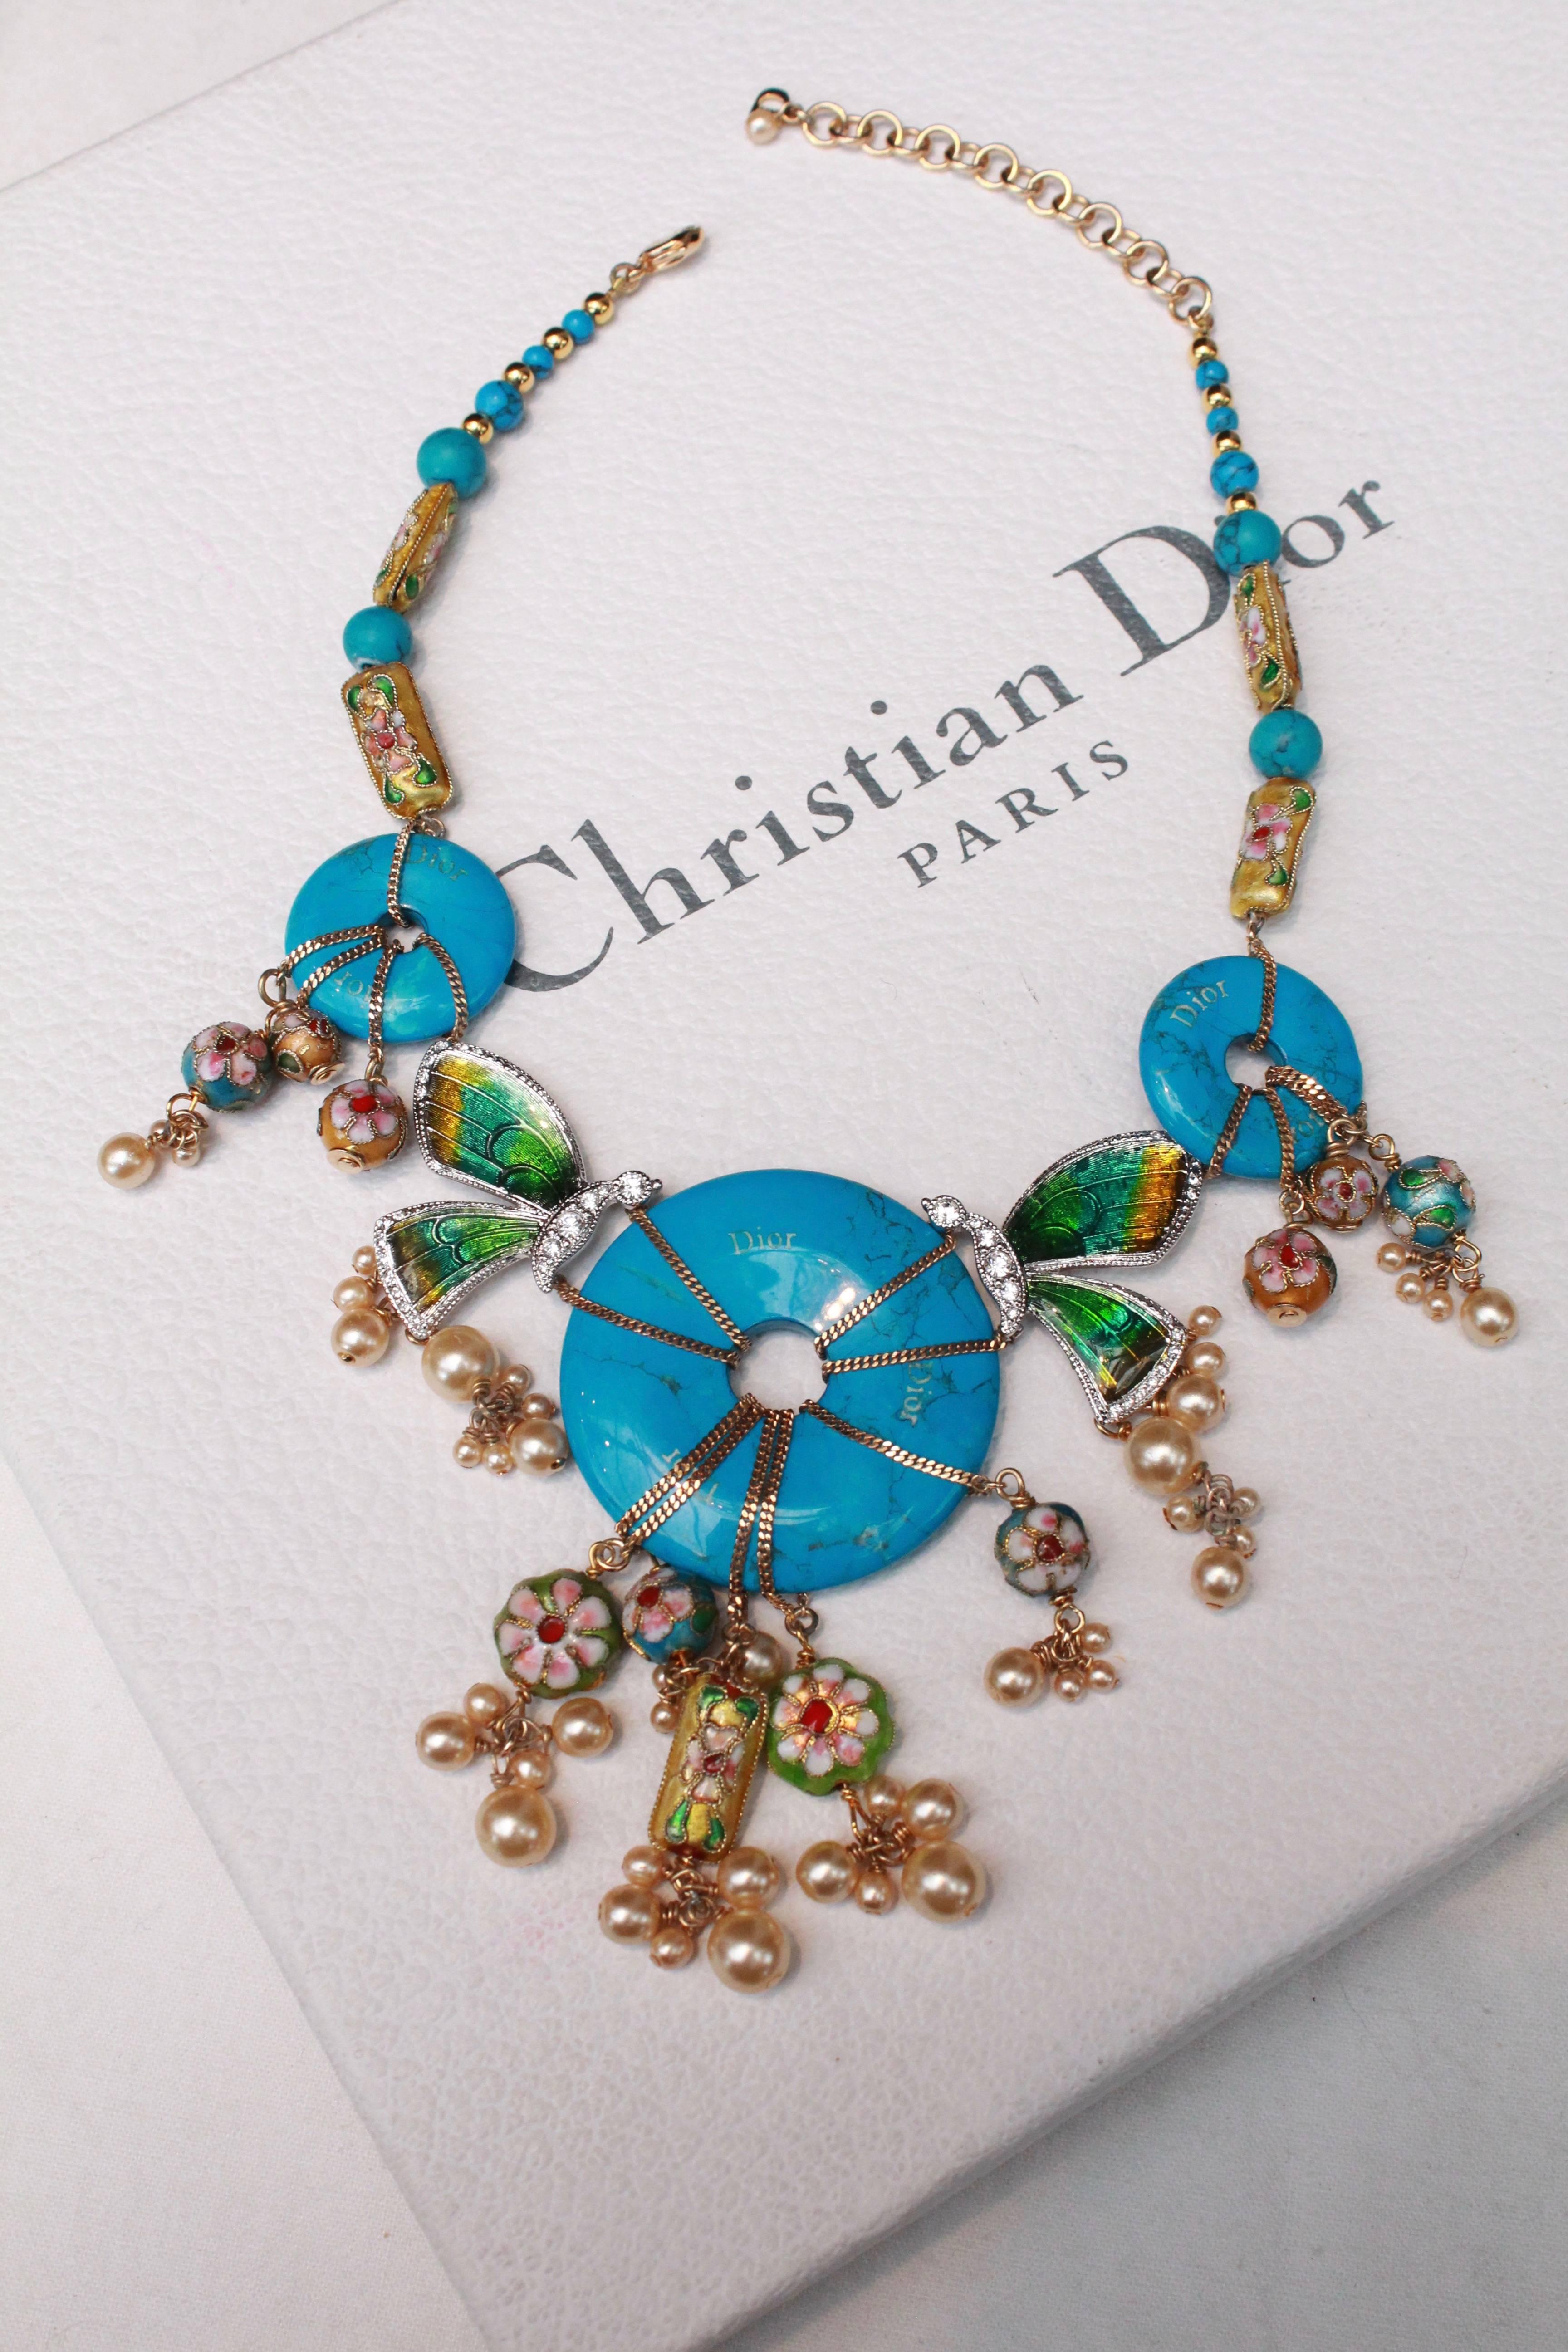 CHRISTIAN DIOR par John Galliano (Made in France) Choker comprised of elongated enameled beads representing flowers, turquoise enameled beads and discs, small golden beads set in gilded metal. In the center, turquoise discs and enameled butterflies